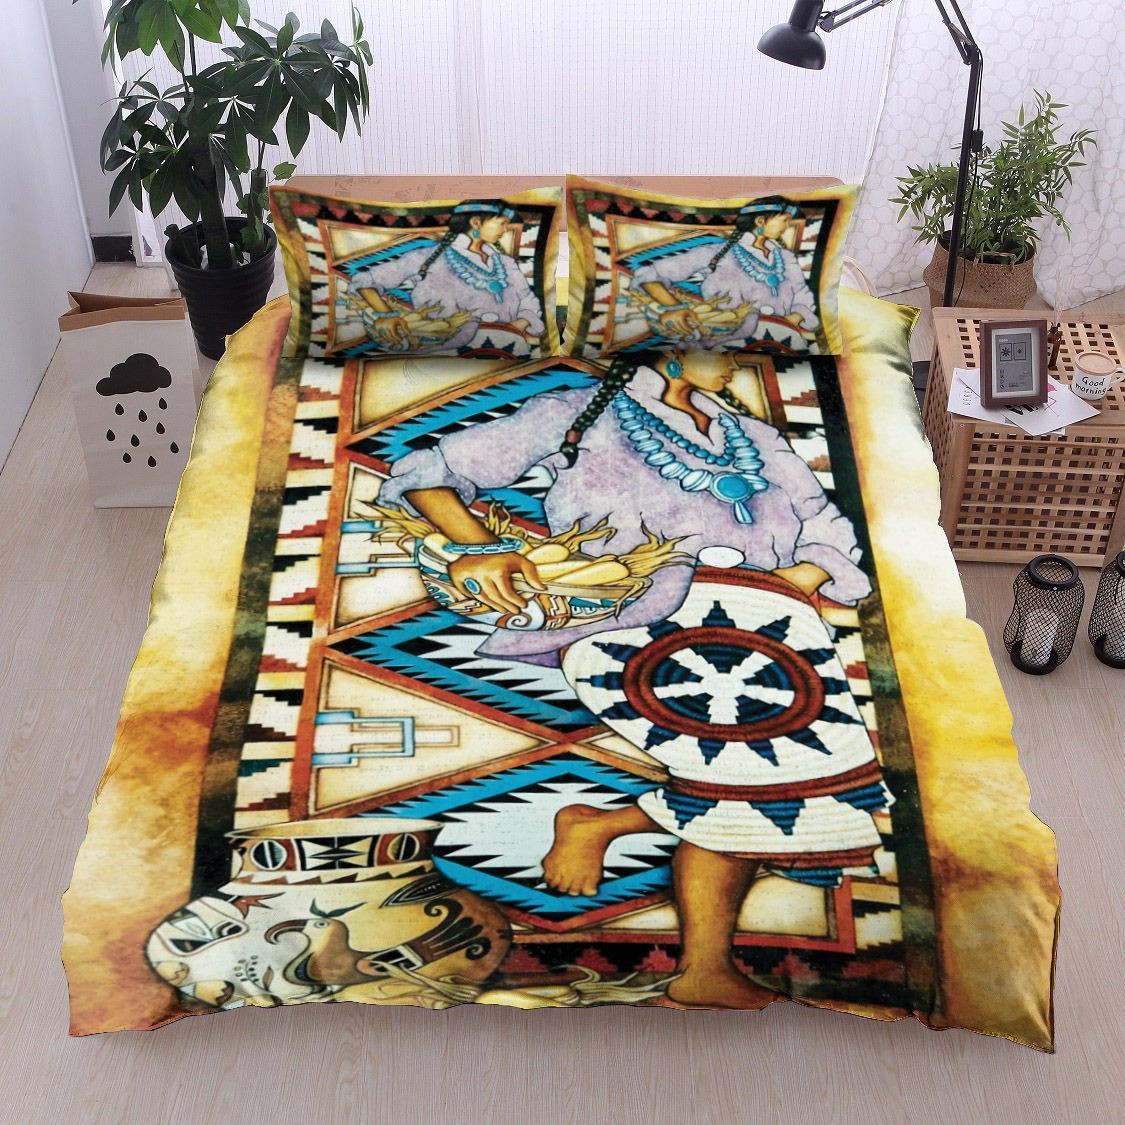 indigenous american bed linens duvet cover bed set perfect presents for birthdays holidays festivities qy2nm